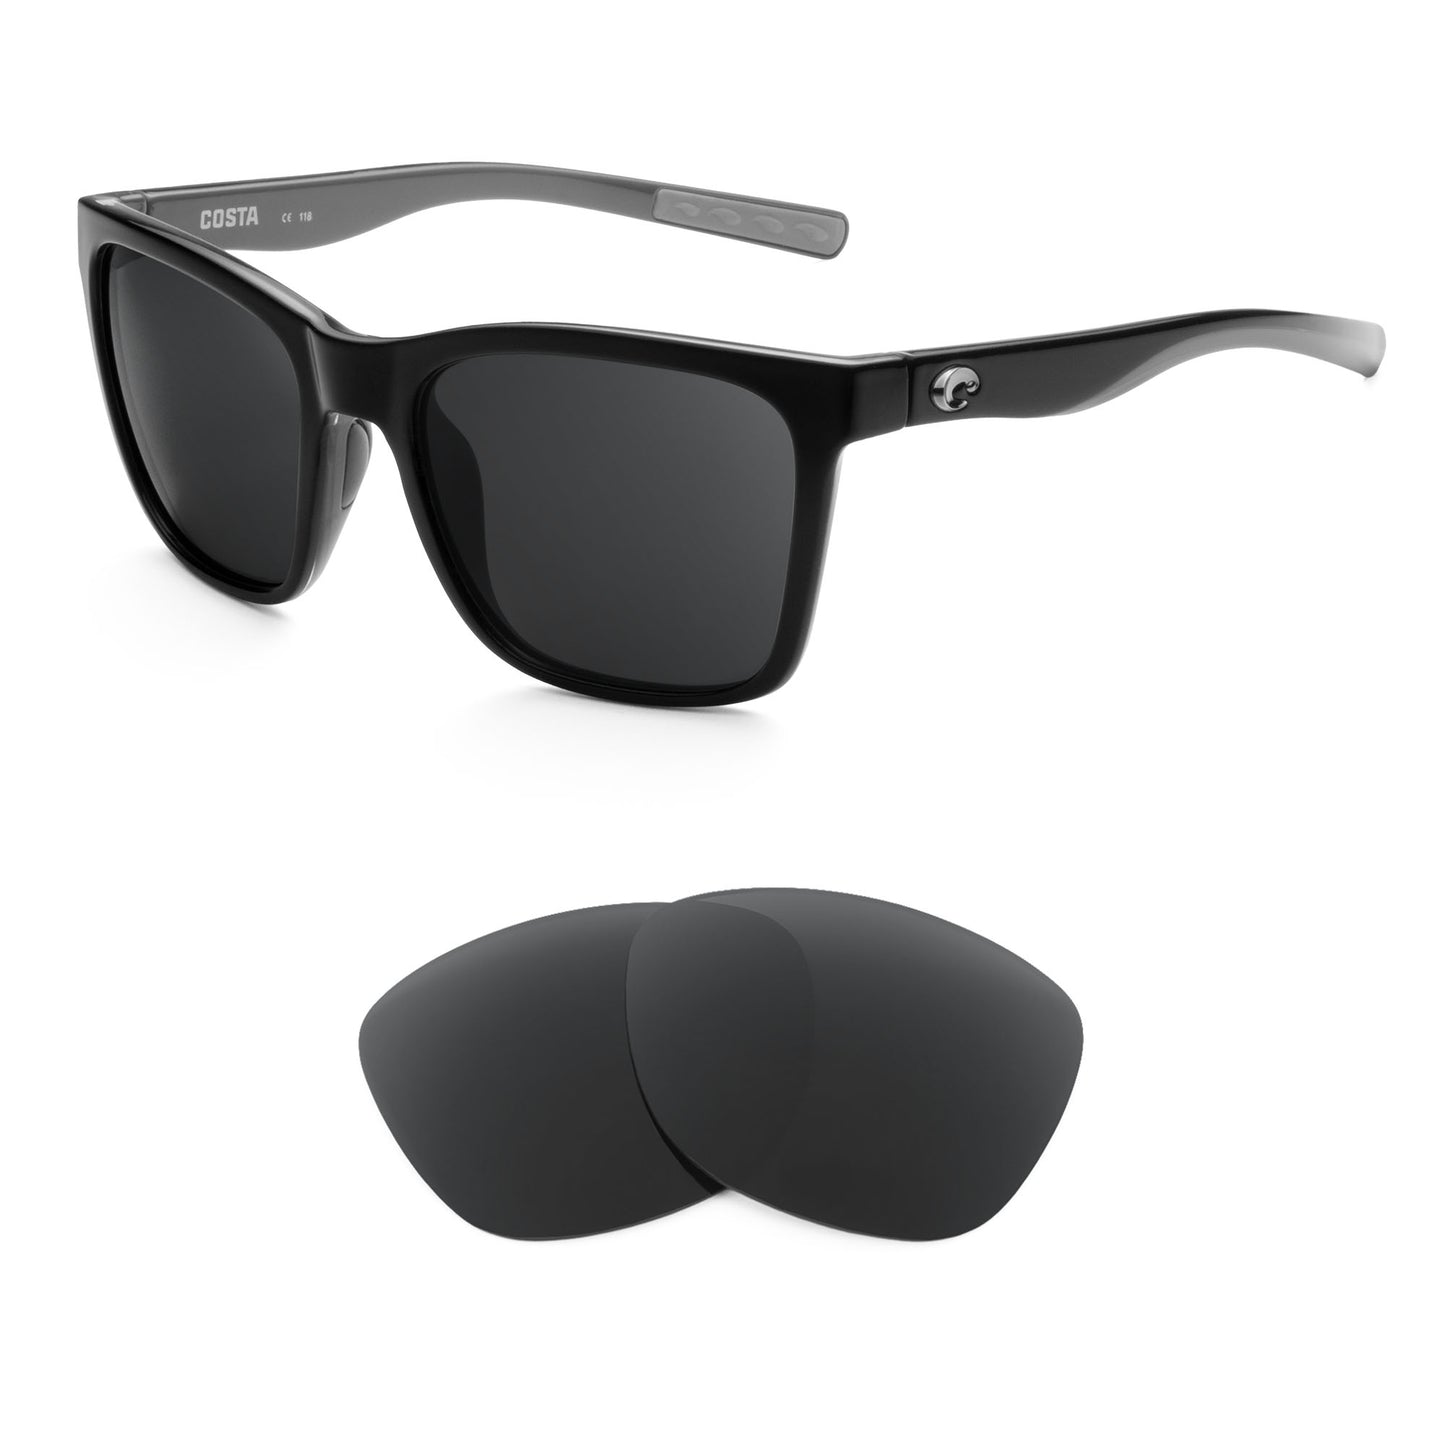 Costa Panga sunglasses with replacement lenses